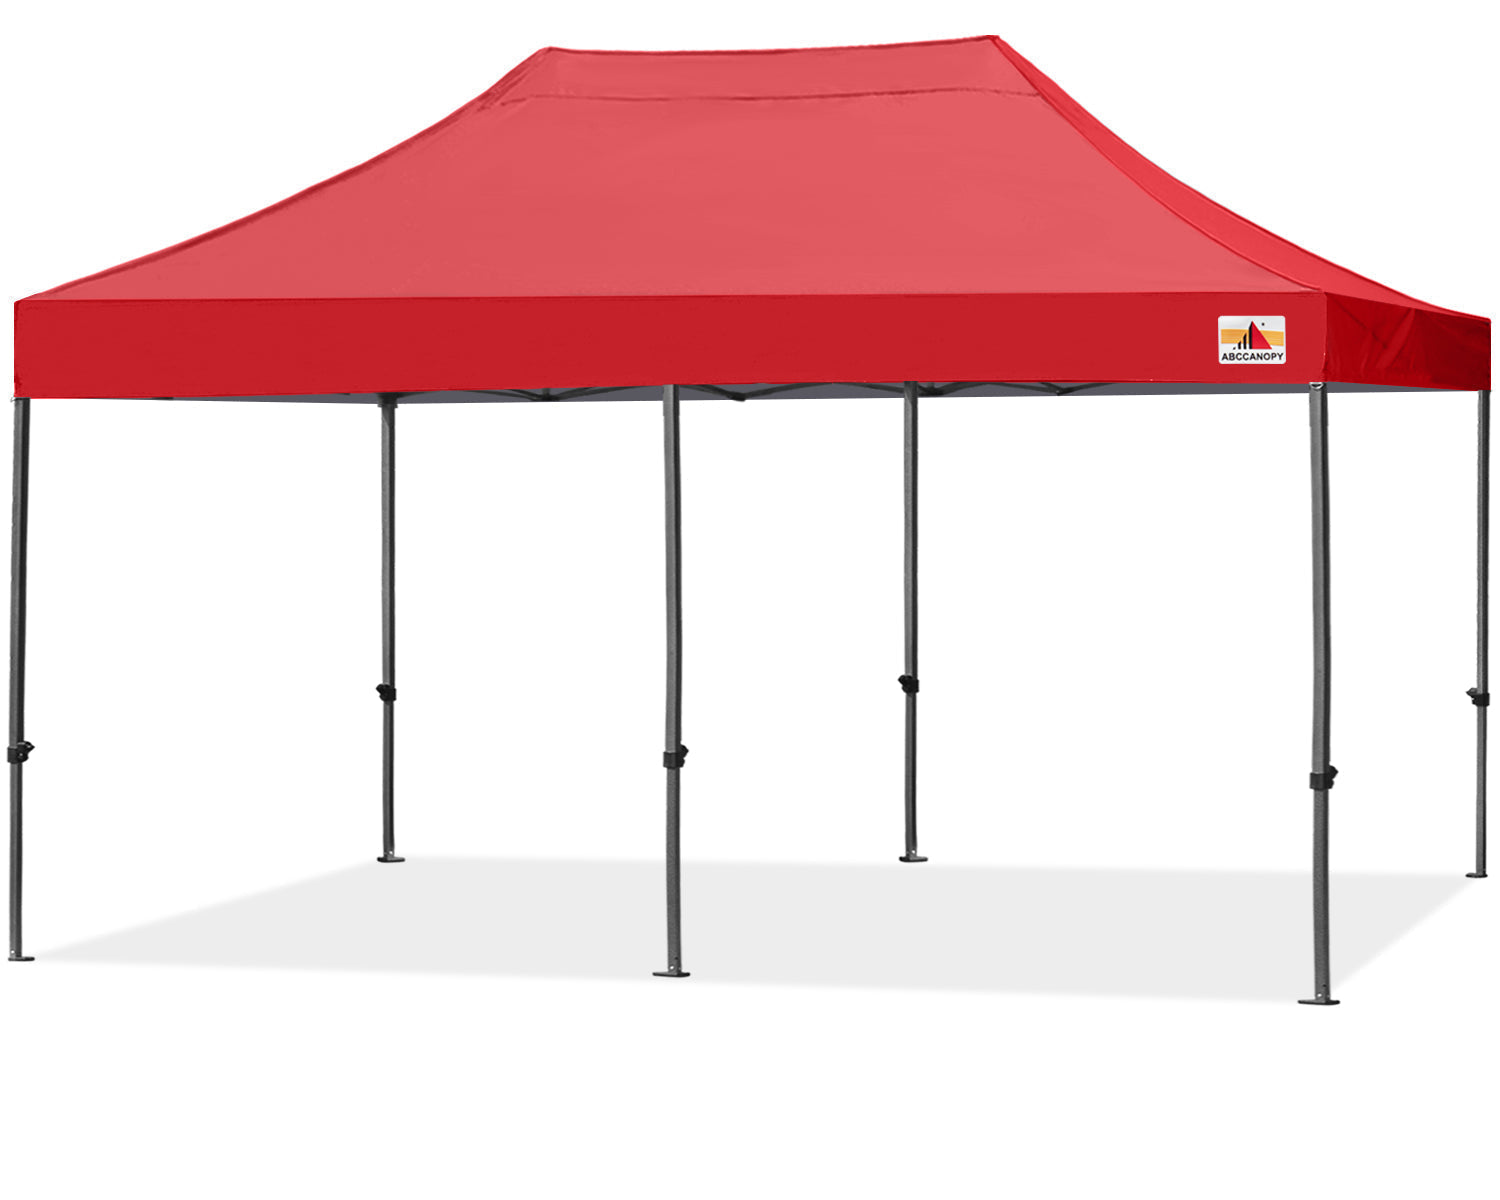 S1 Commercial 10x20 Canopy